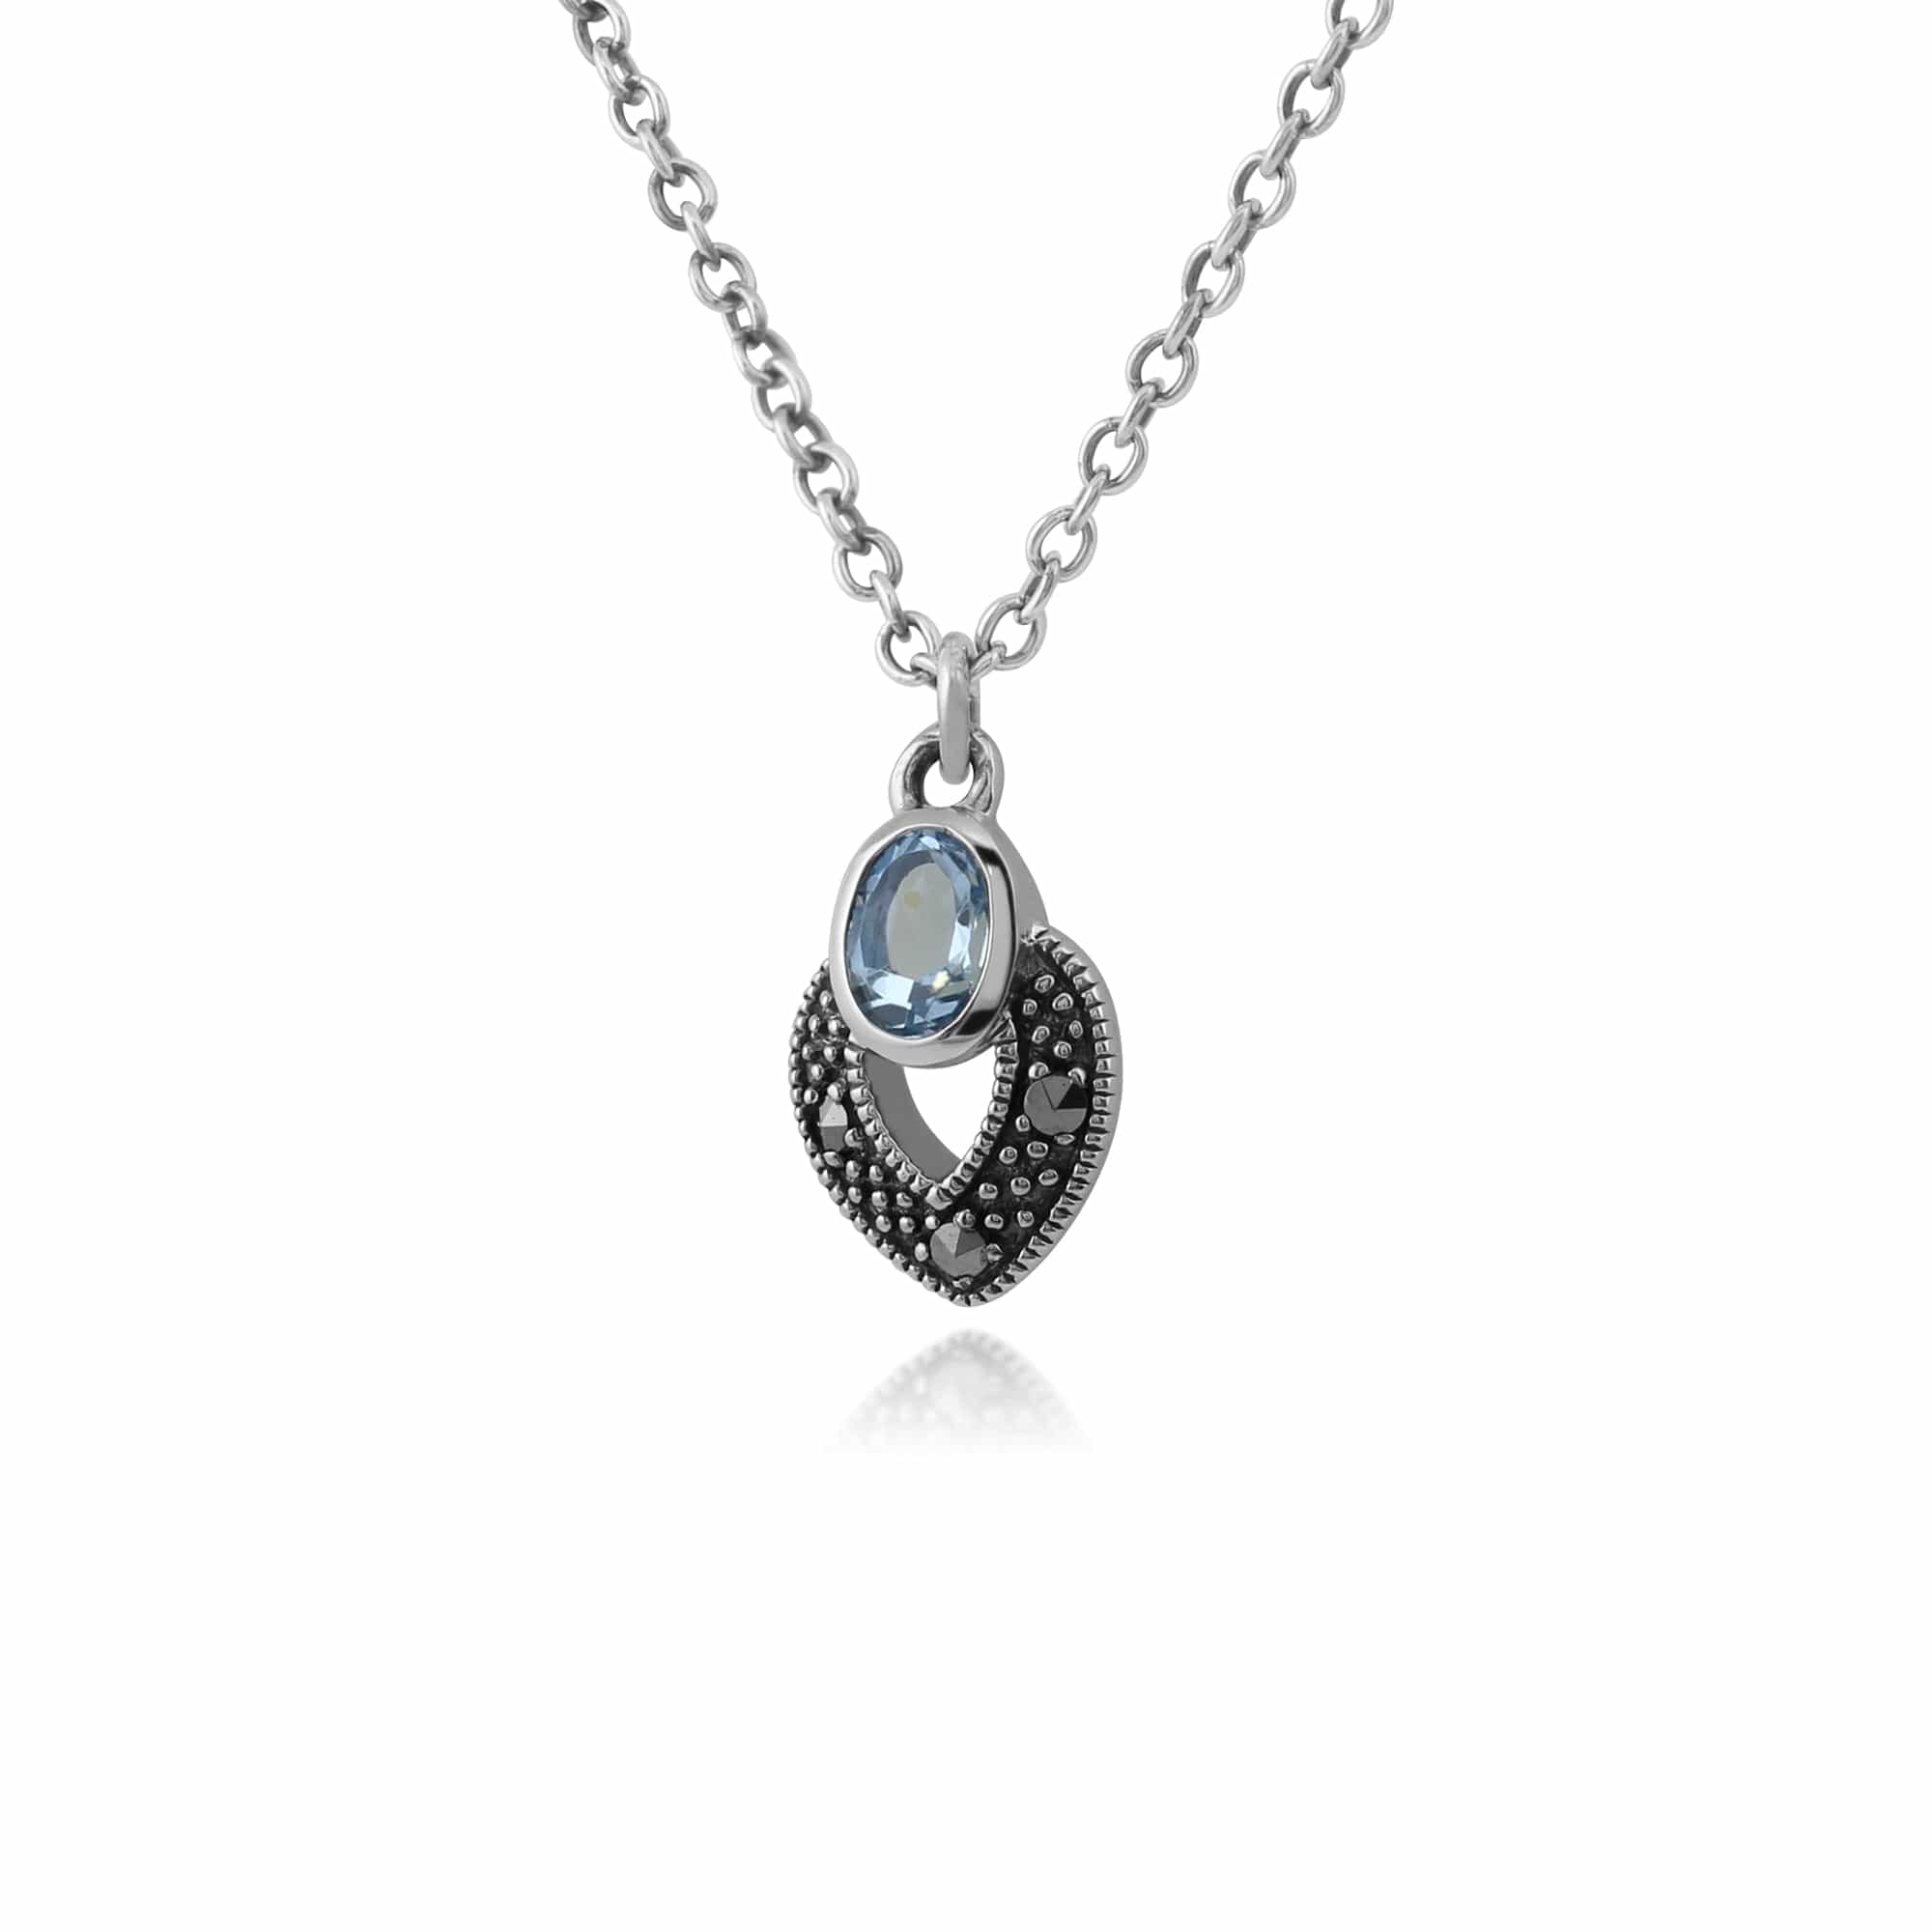 214N688205925 Art Deco Style Oval Aquamarine & Marcasite Necklace in 925 Sterling Silver 2